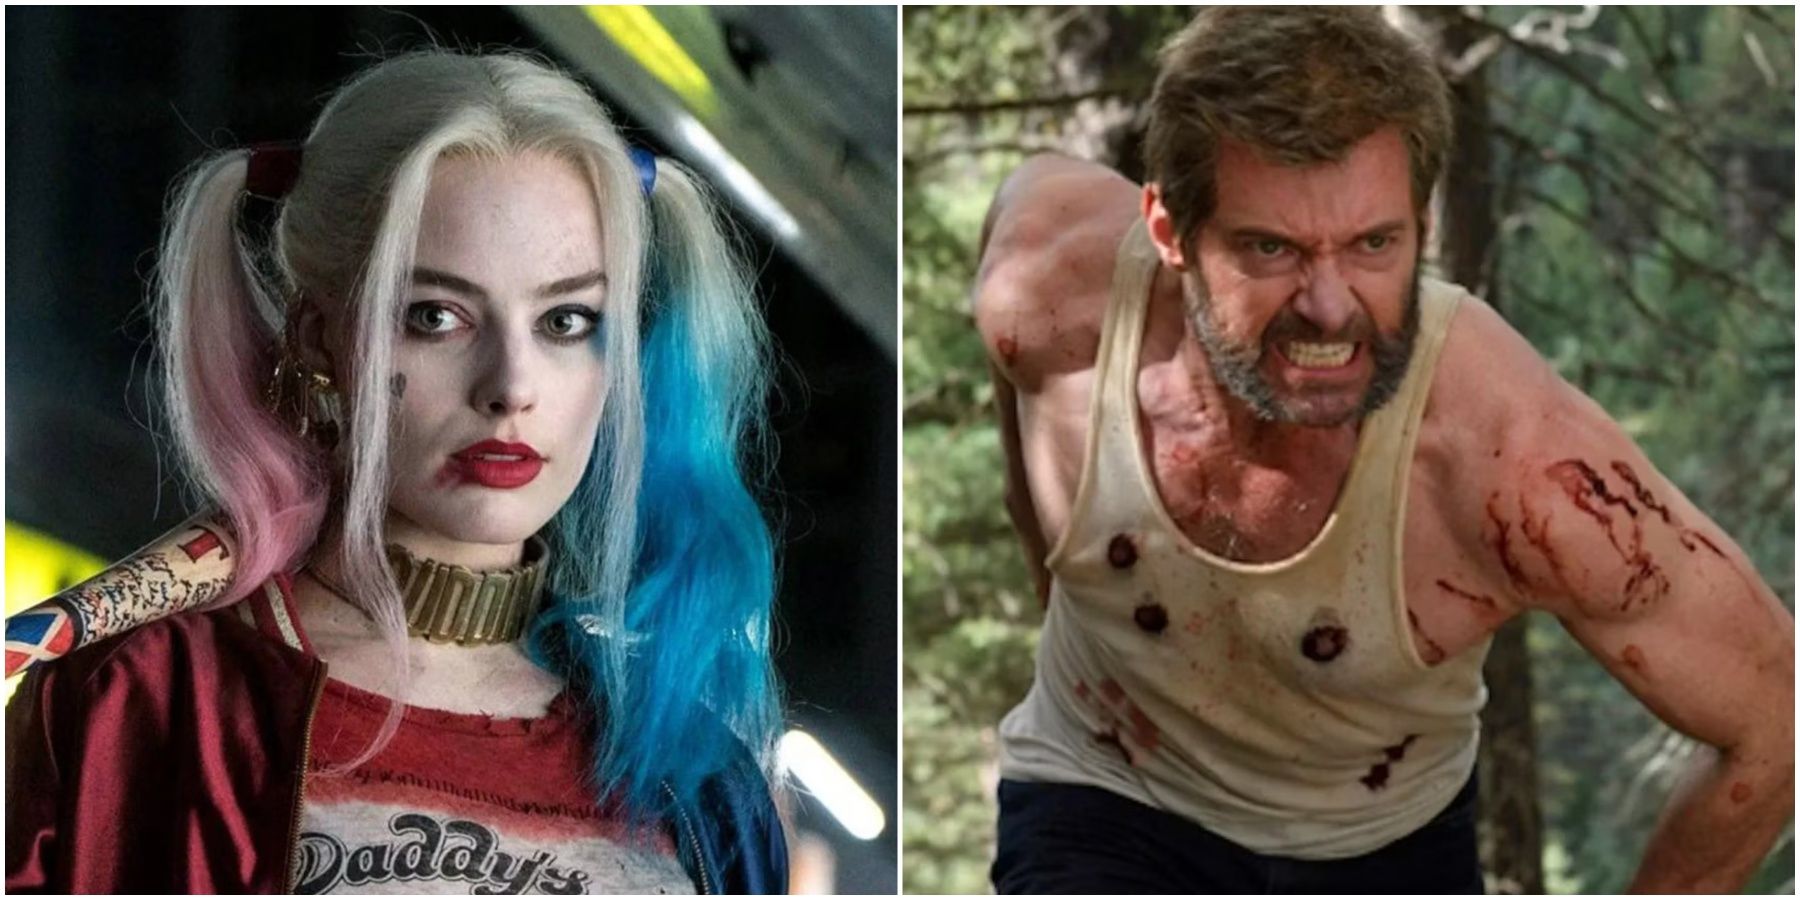 Harley Quinn in Suicide Squad and Wolverine in Logan